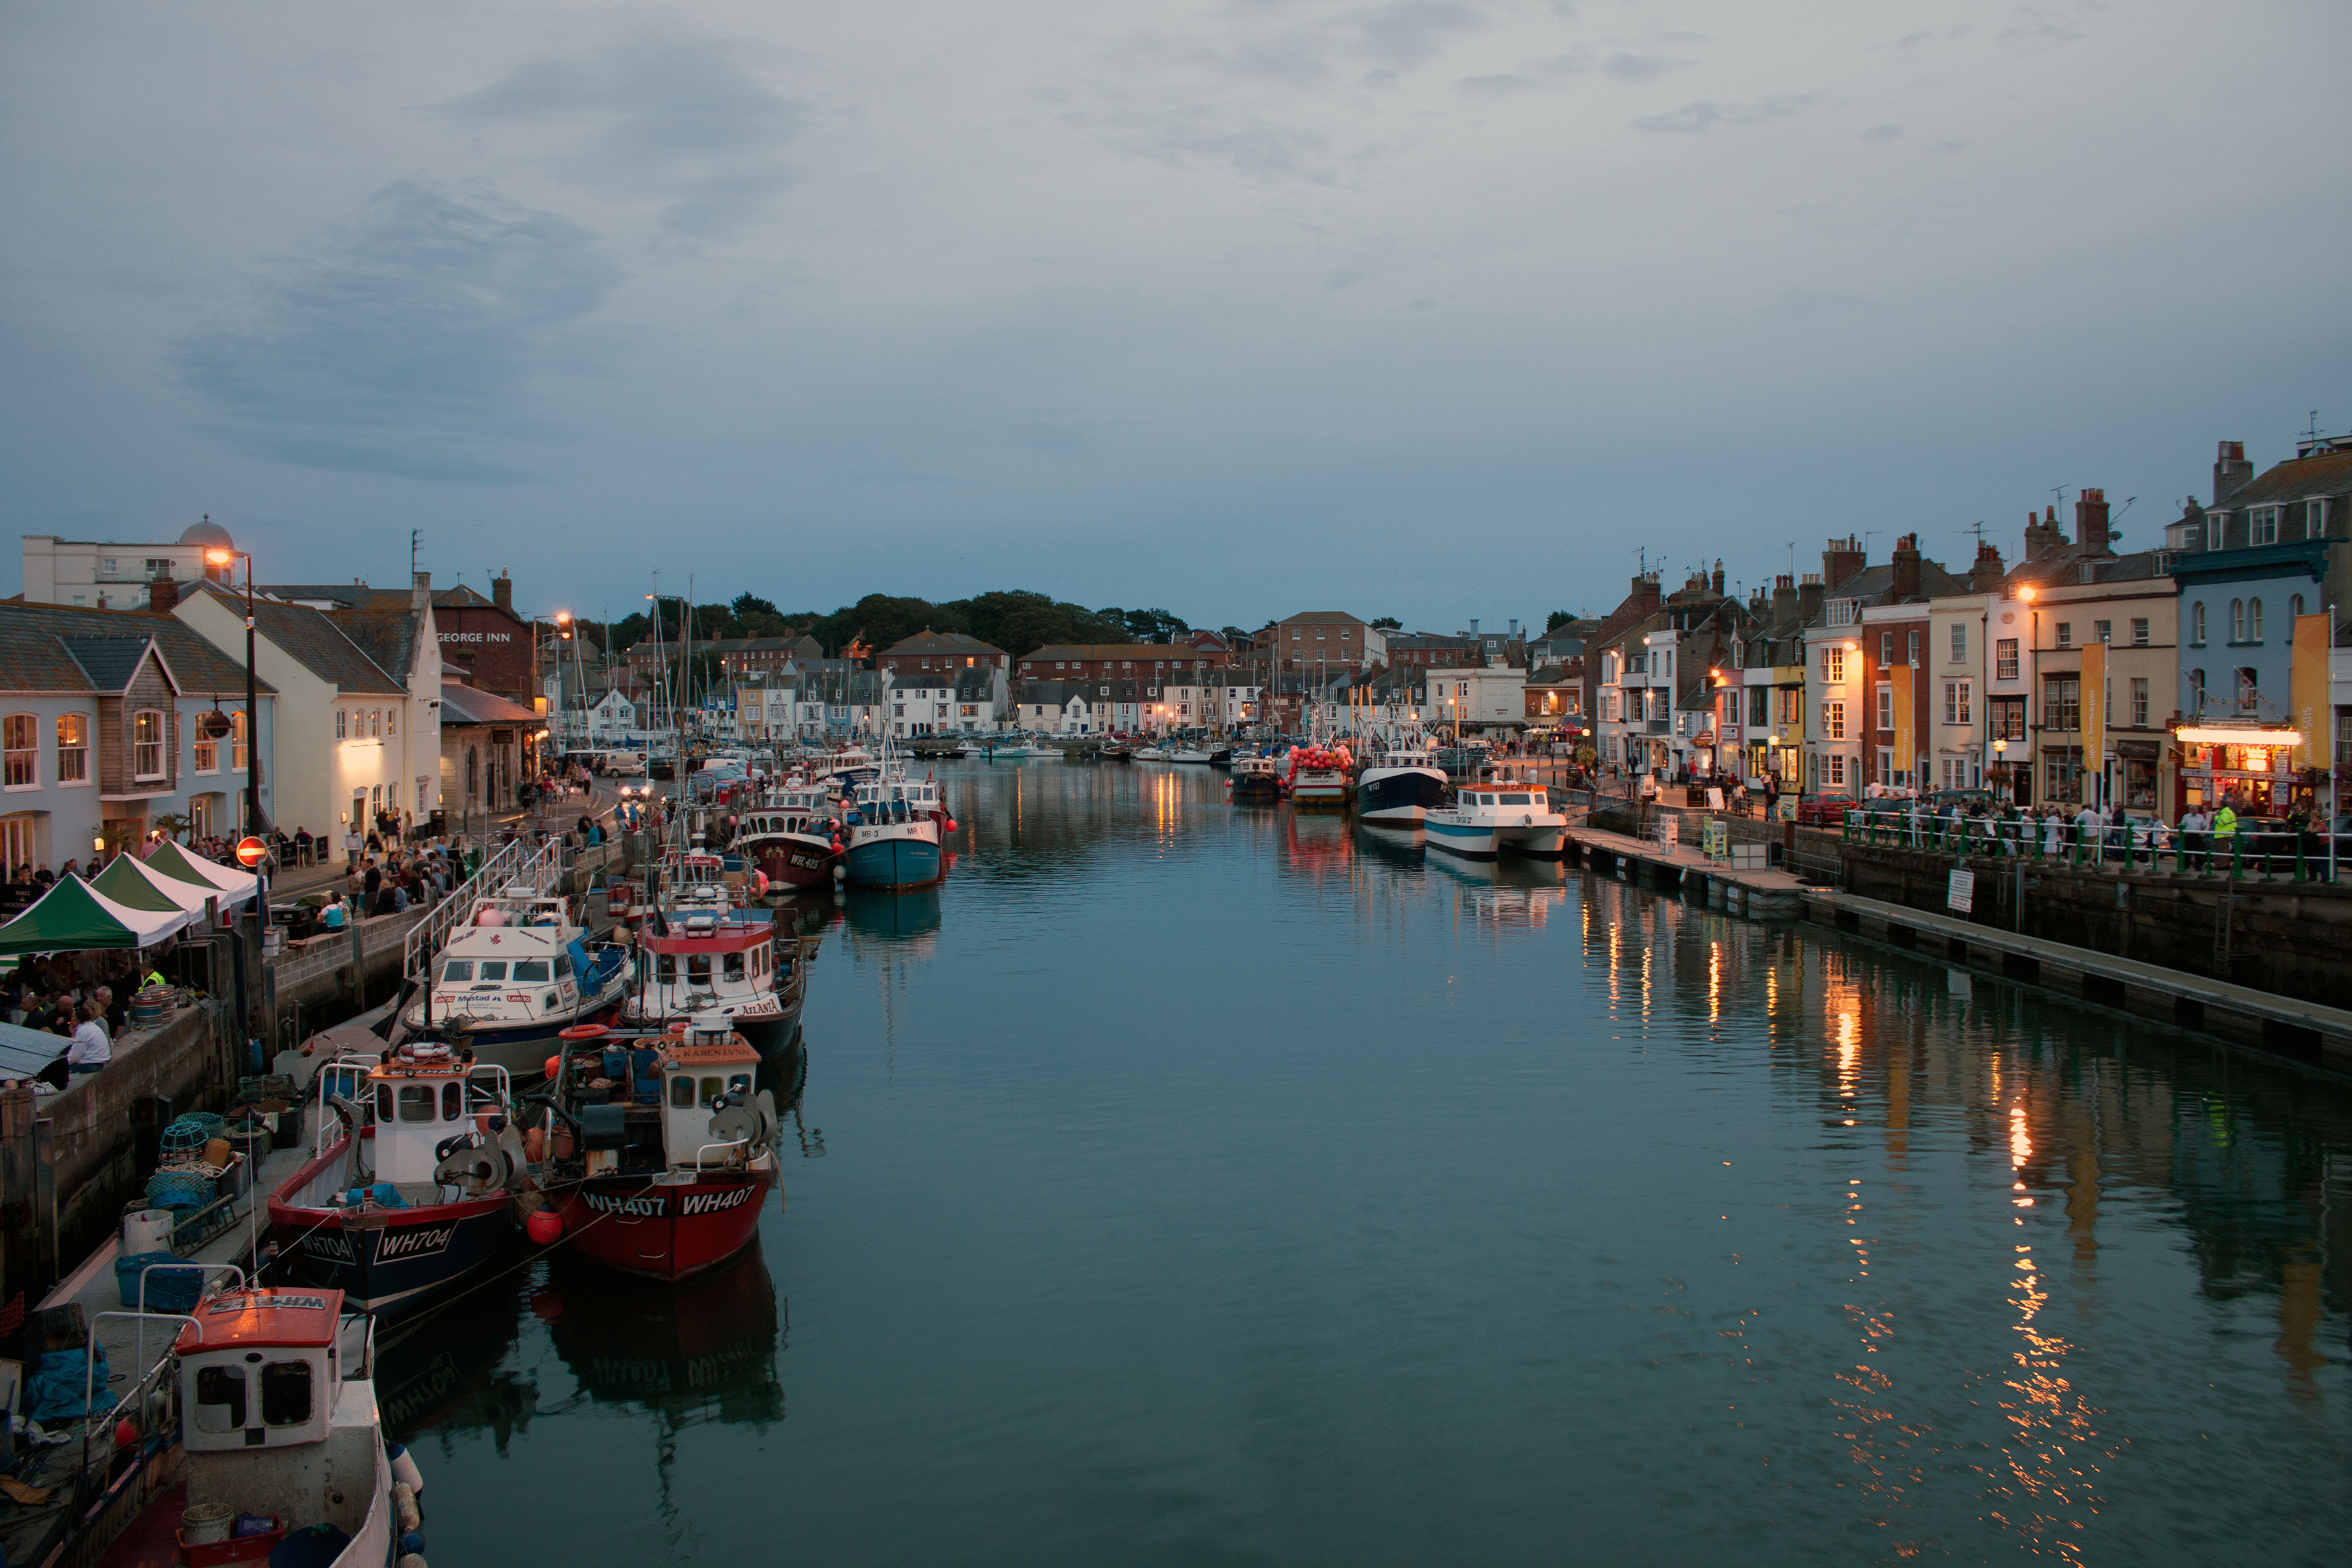 UK – Dorset, Weymouth Harbour during blue hour by Lukes_photos is licensed under CC BY-SA 2.0